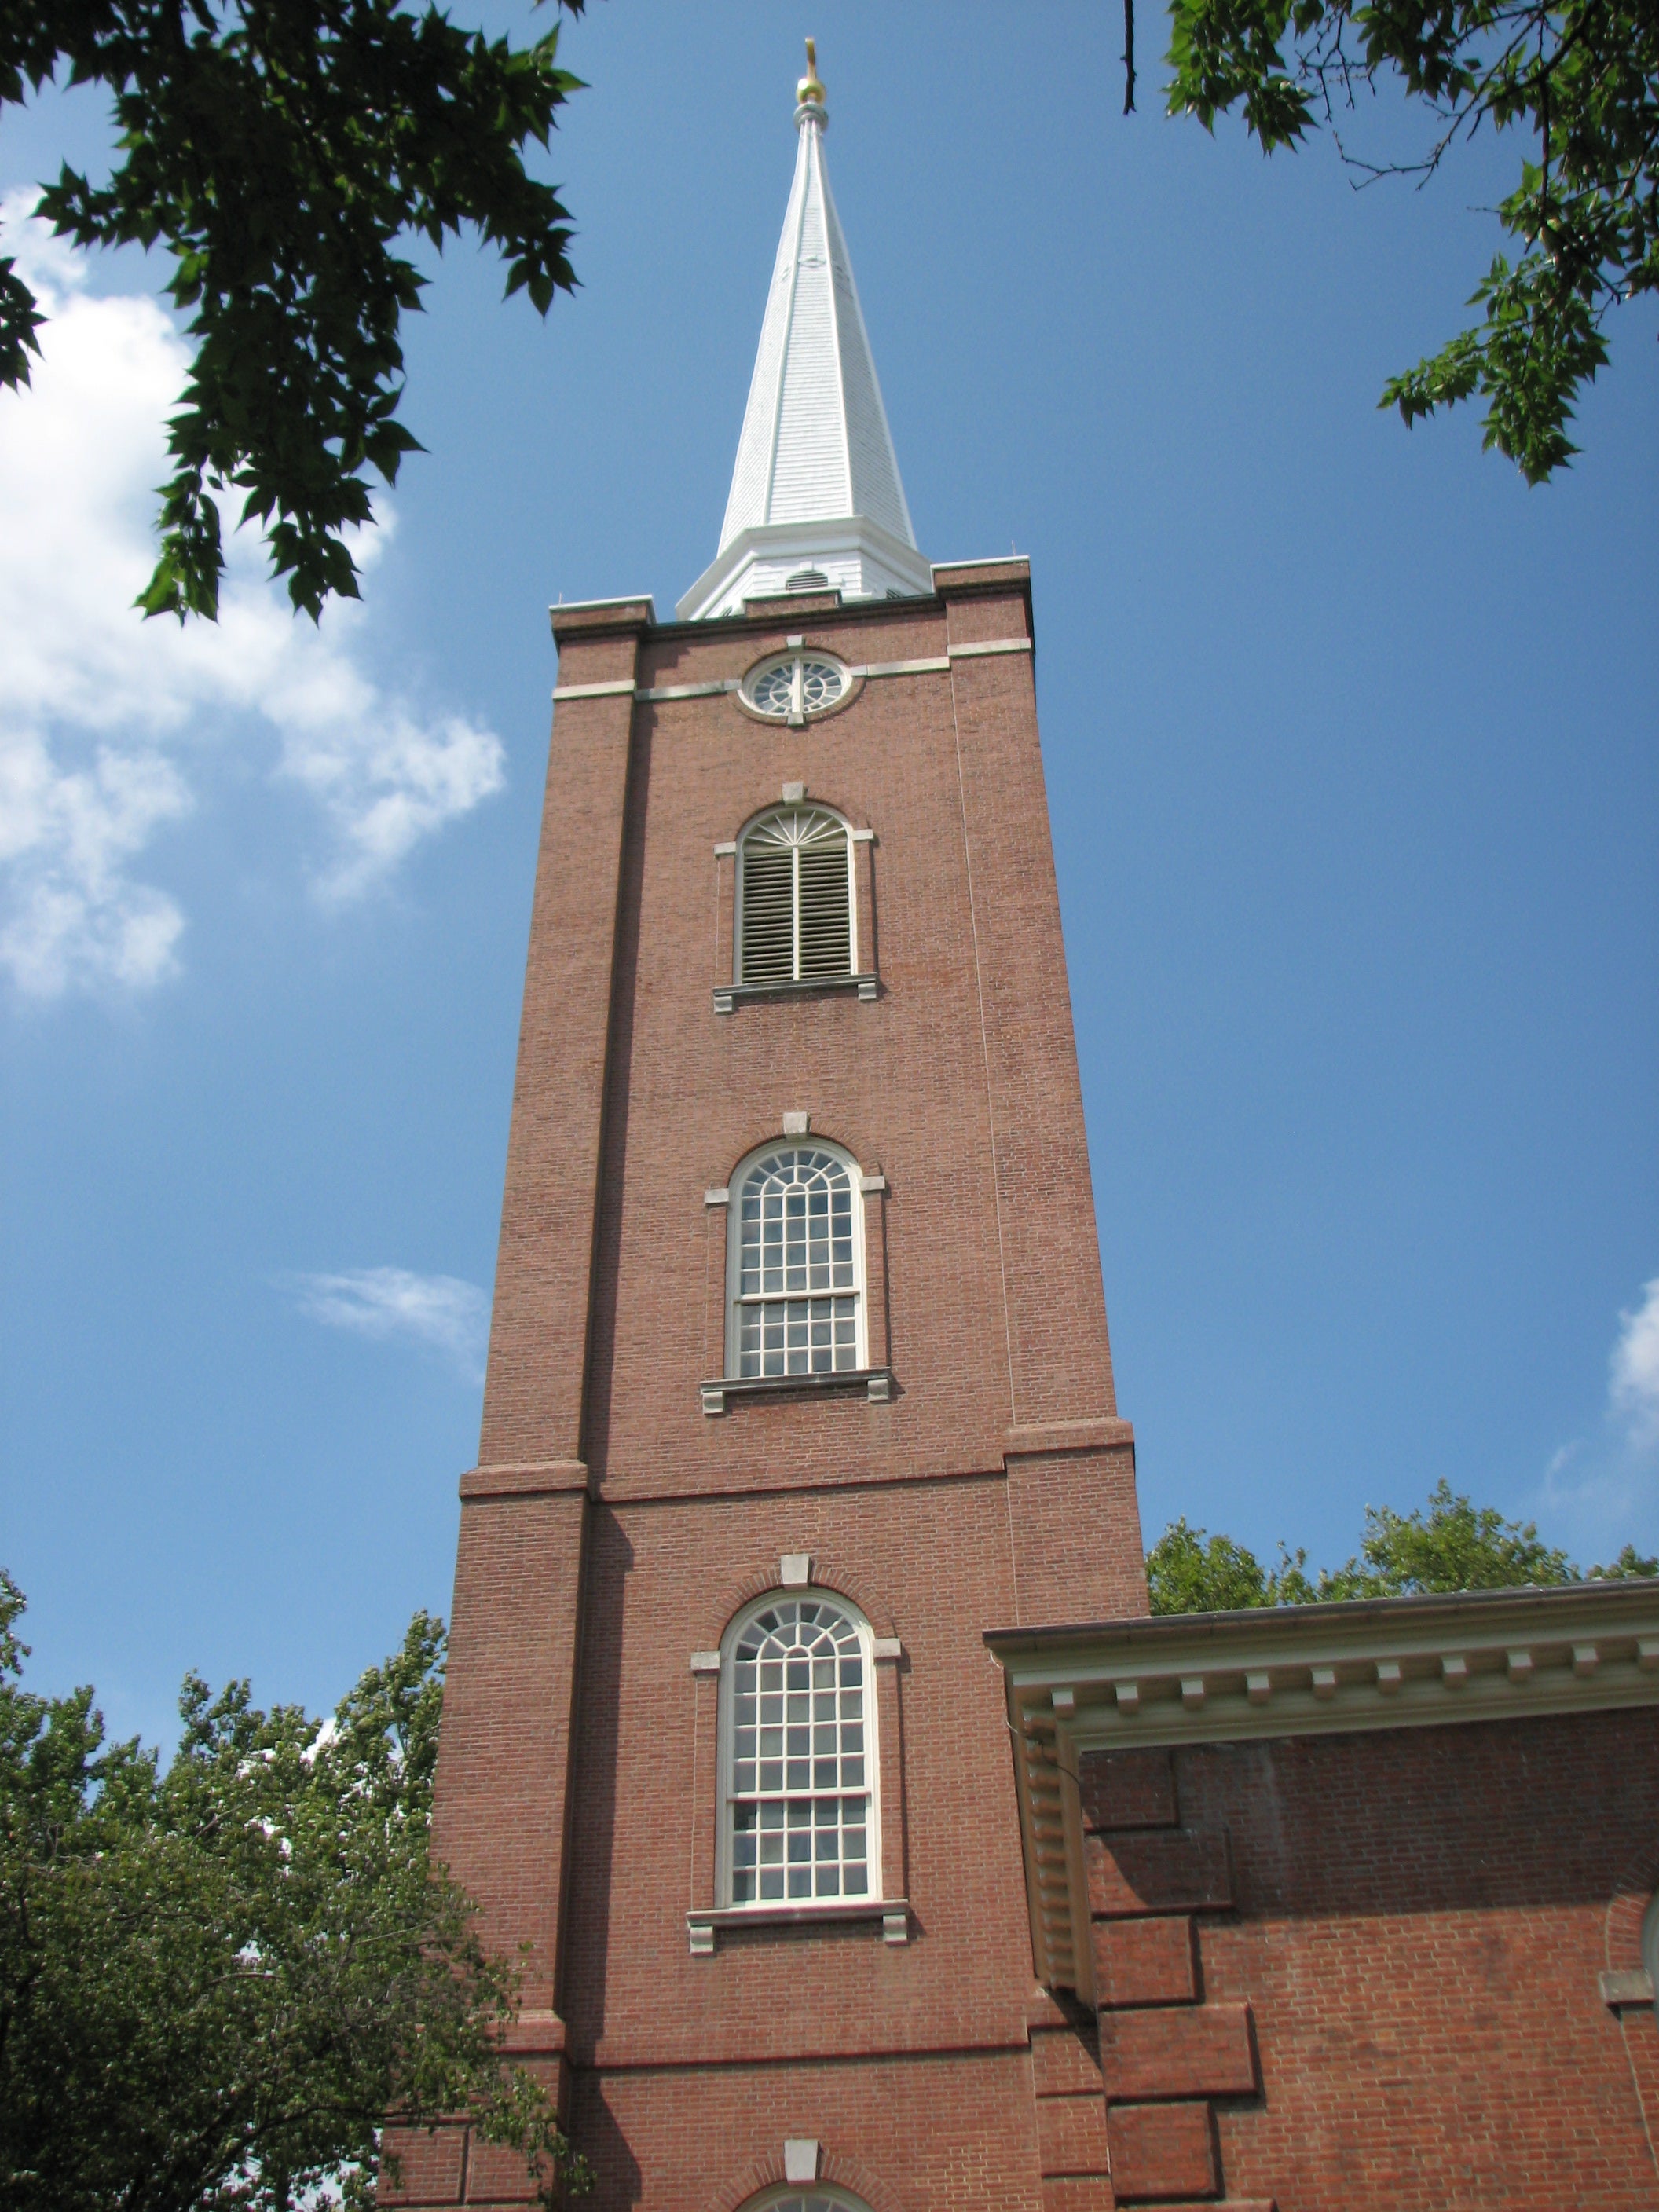 The church steeple was added by architect William Strickland in 1842.